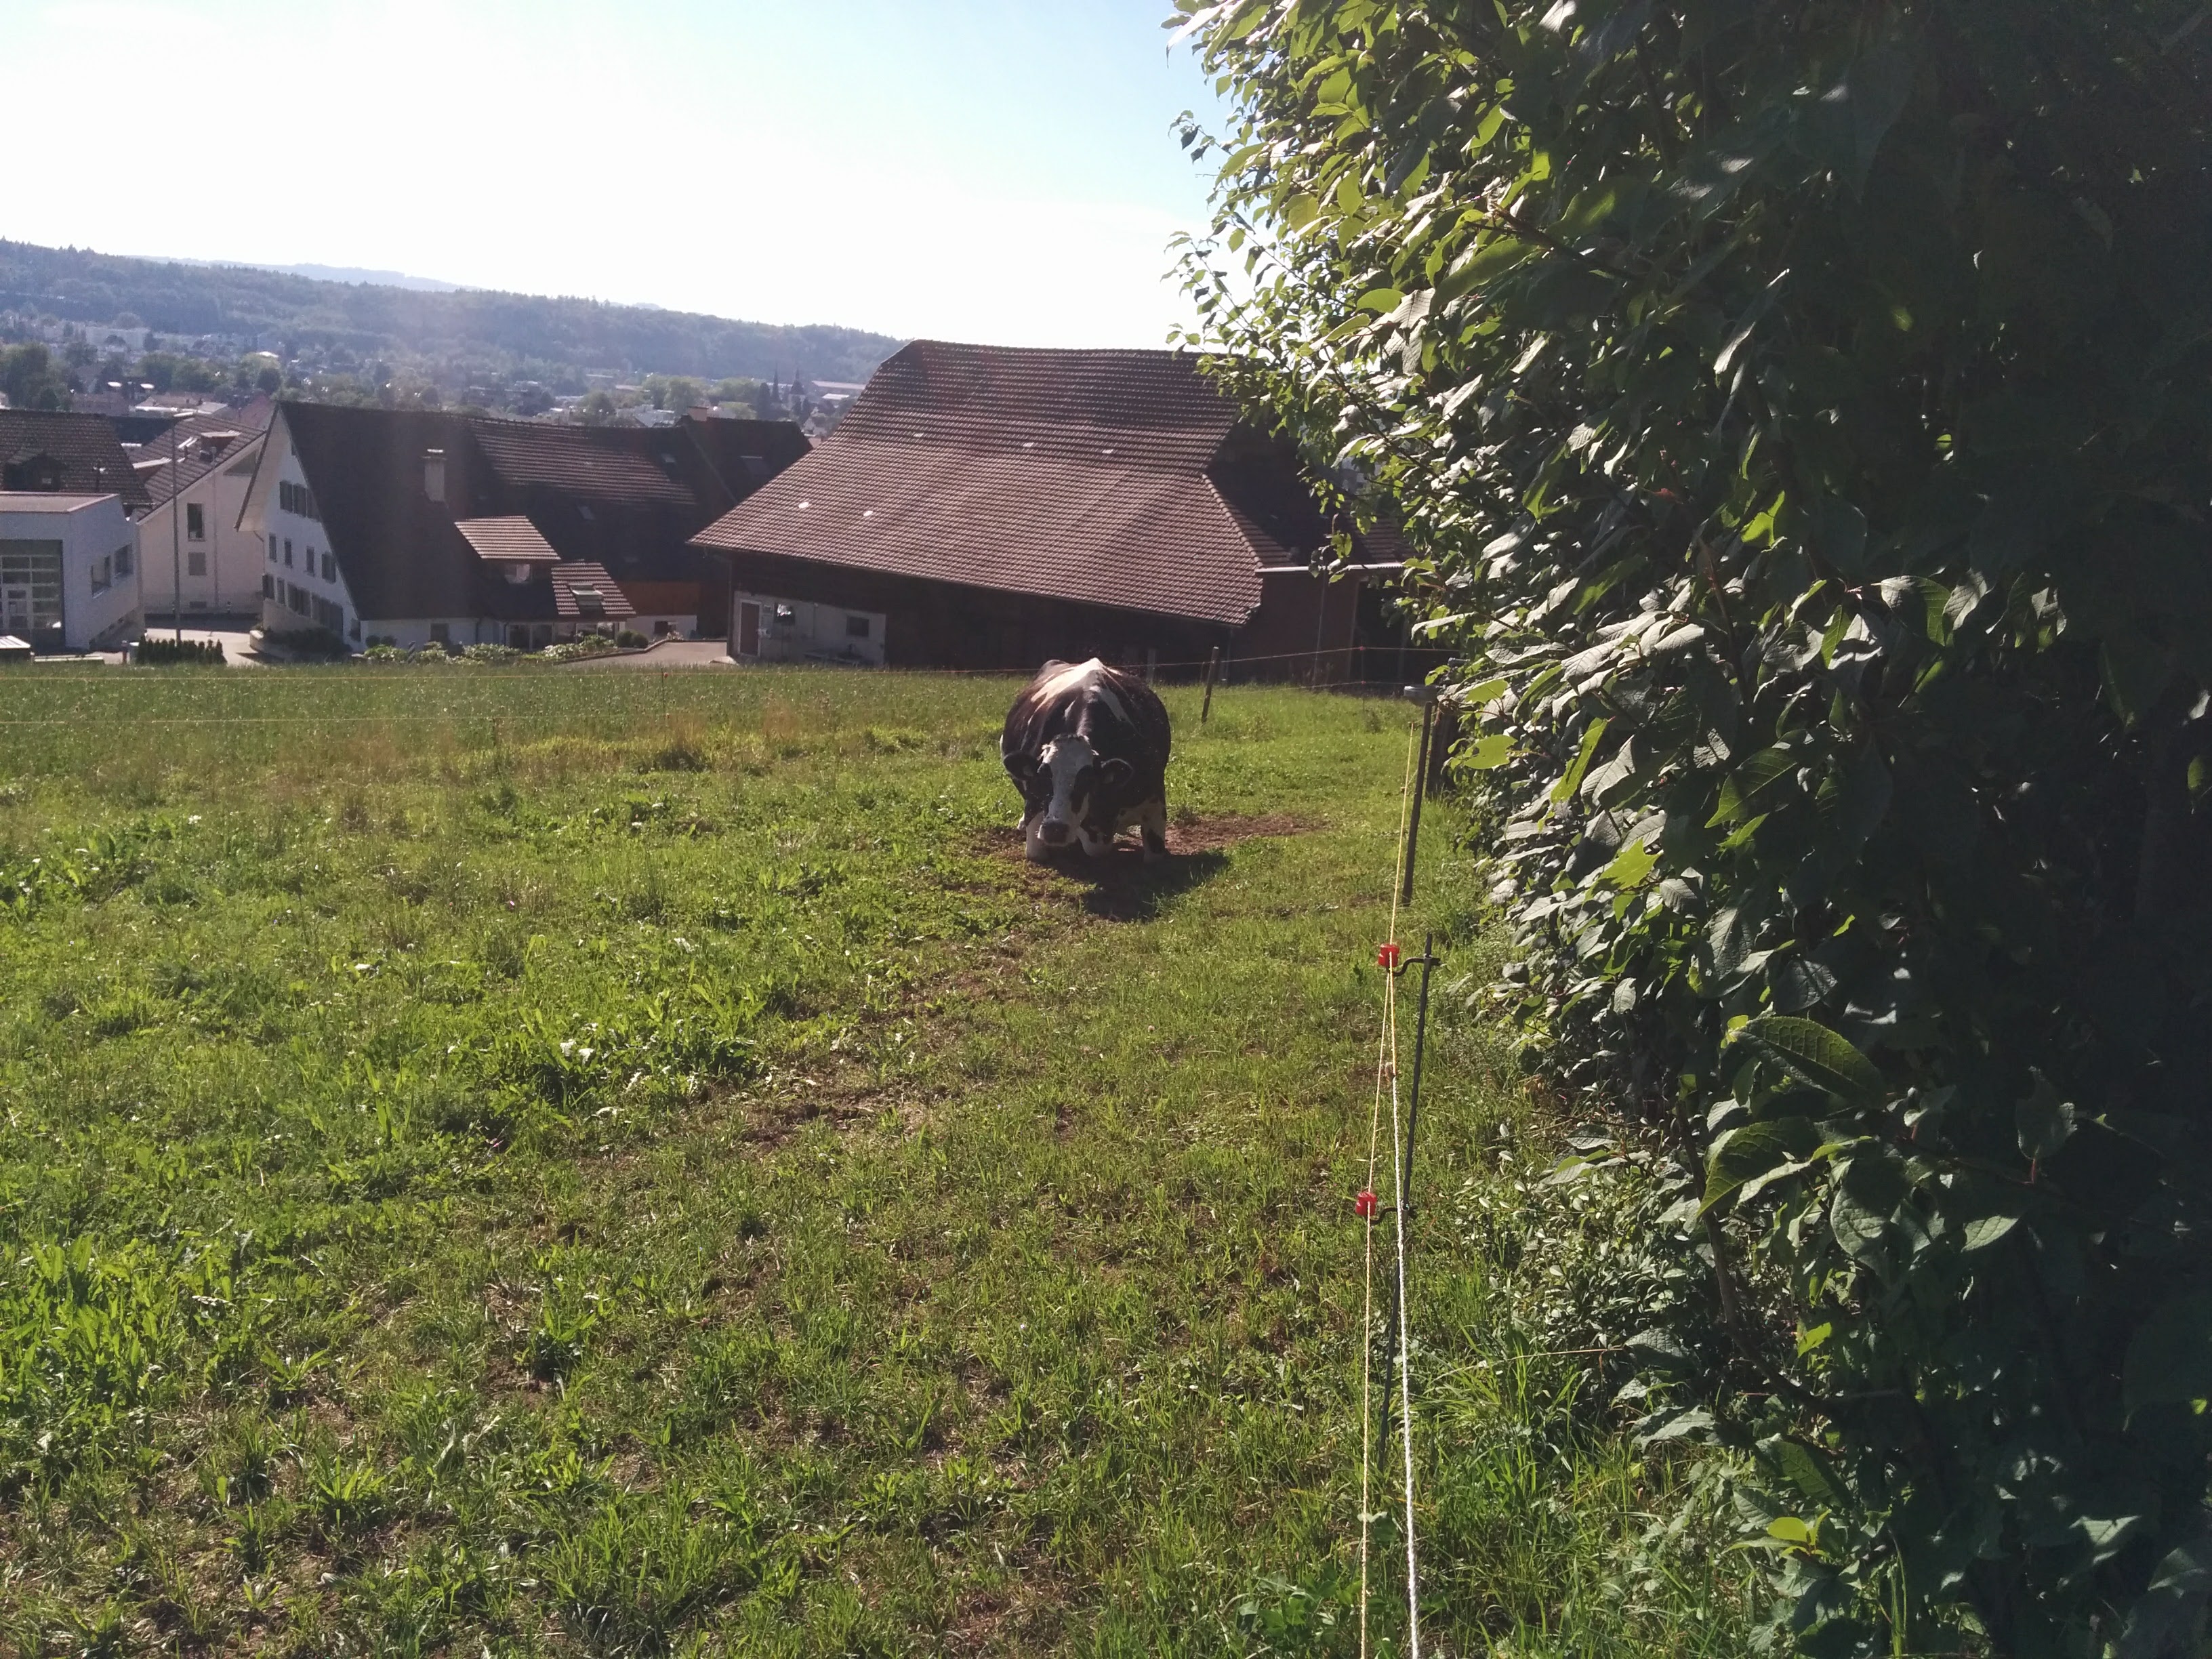 This cow started to stand up to conceal its laziness... but now the shame will never leave!